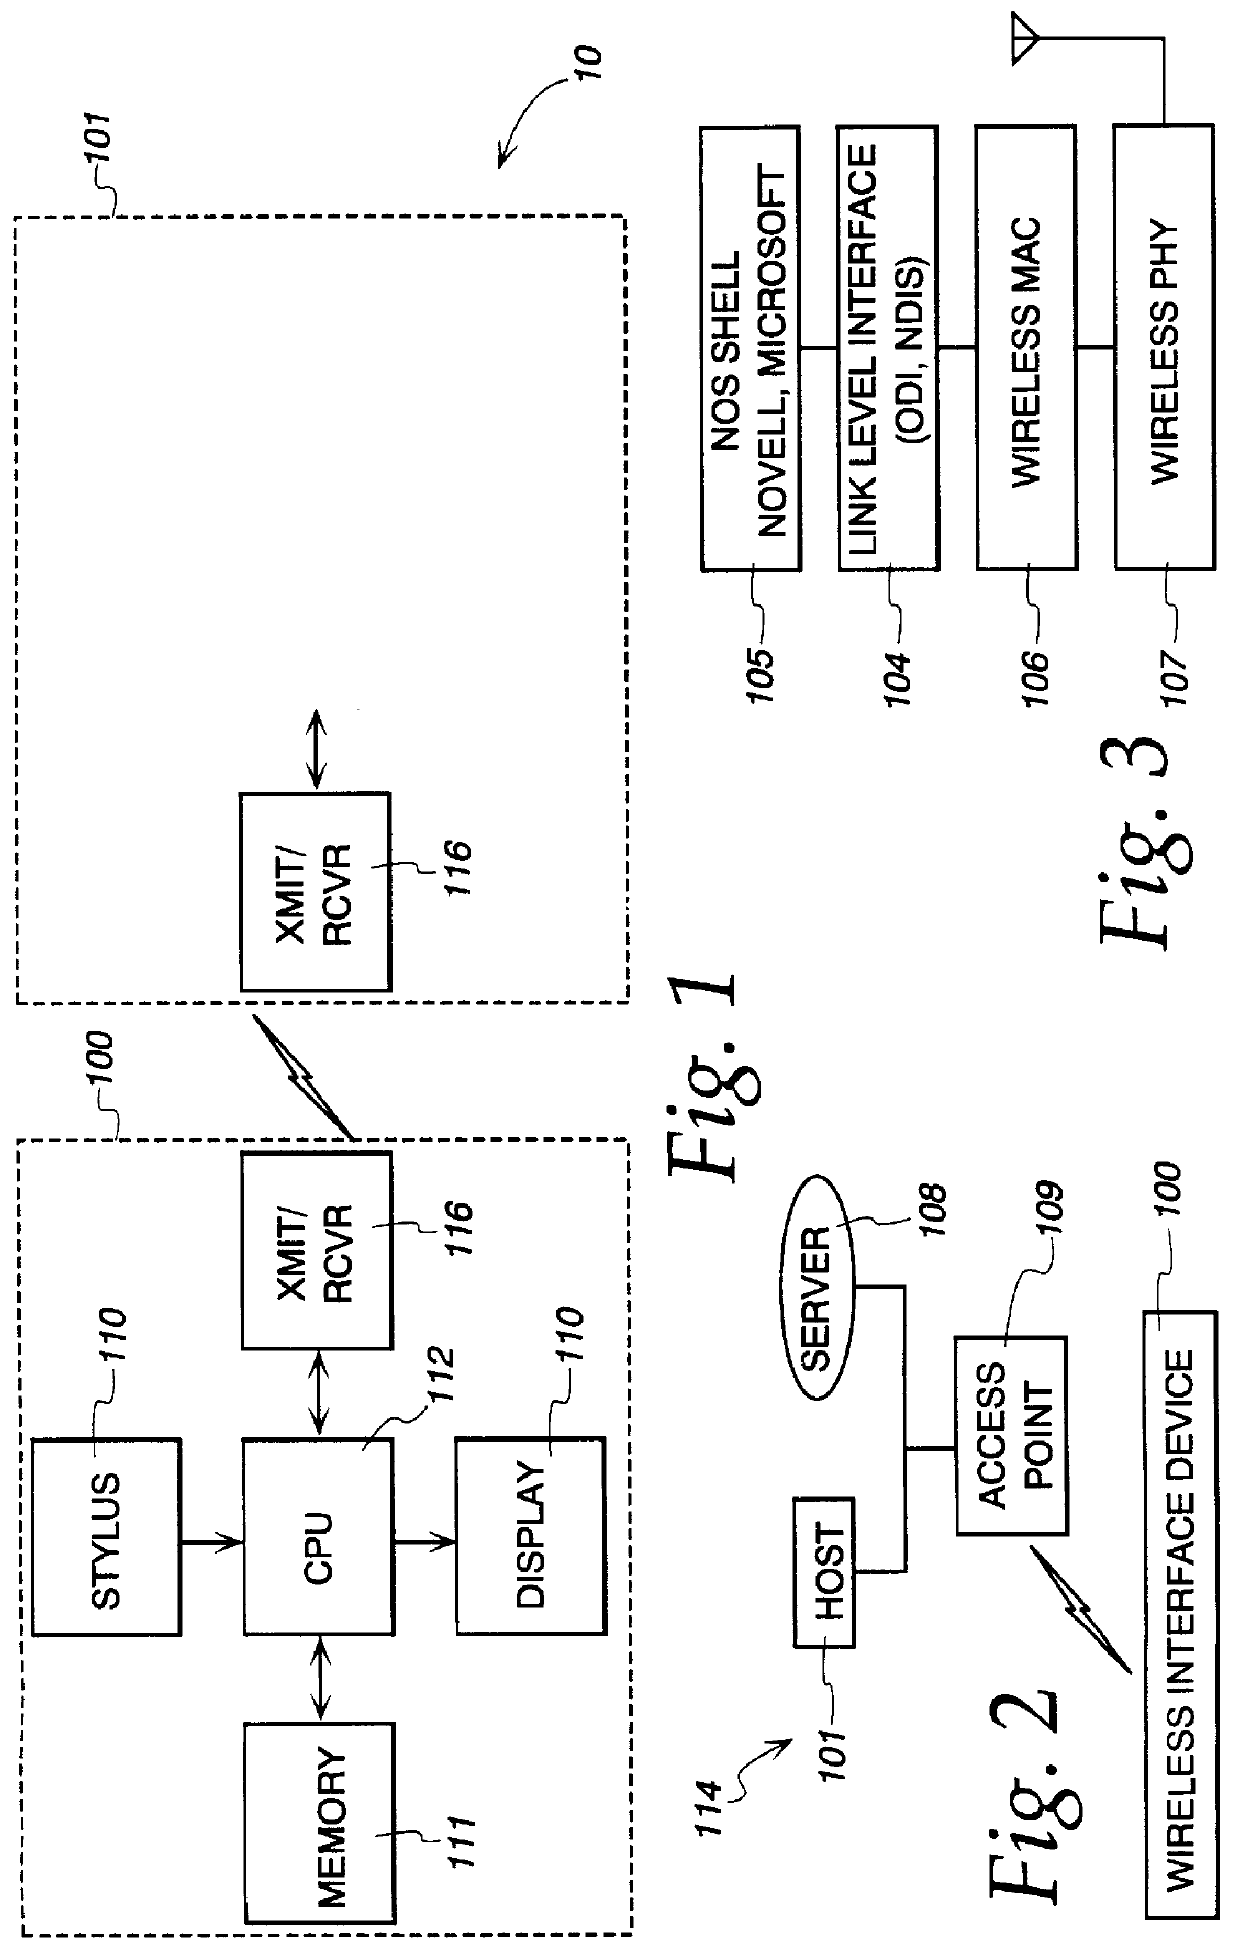 Method and system for rebooting a computer having corrupted memory using an external jumper